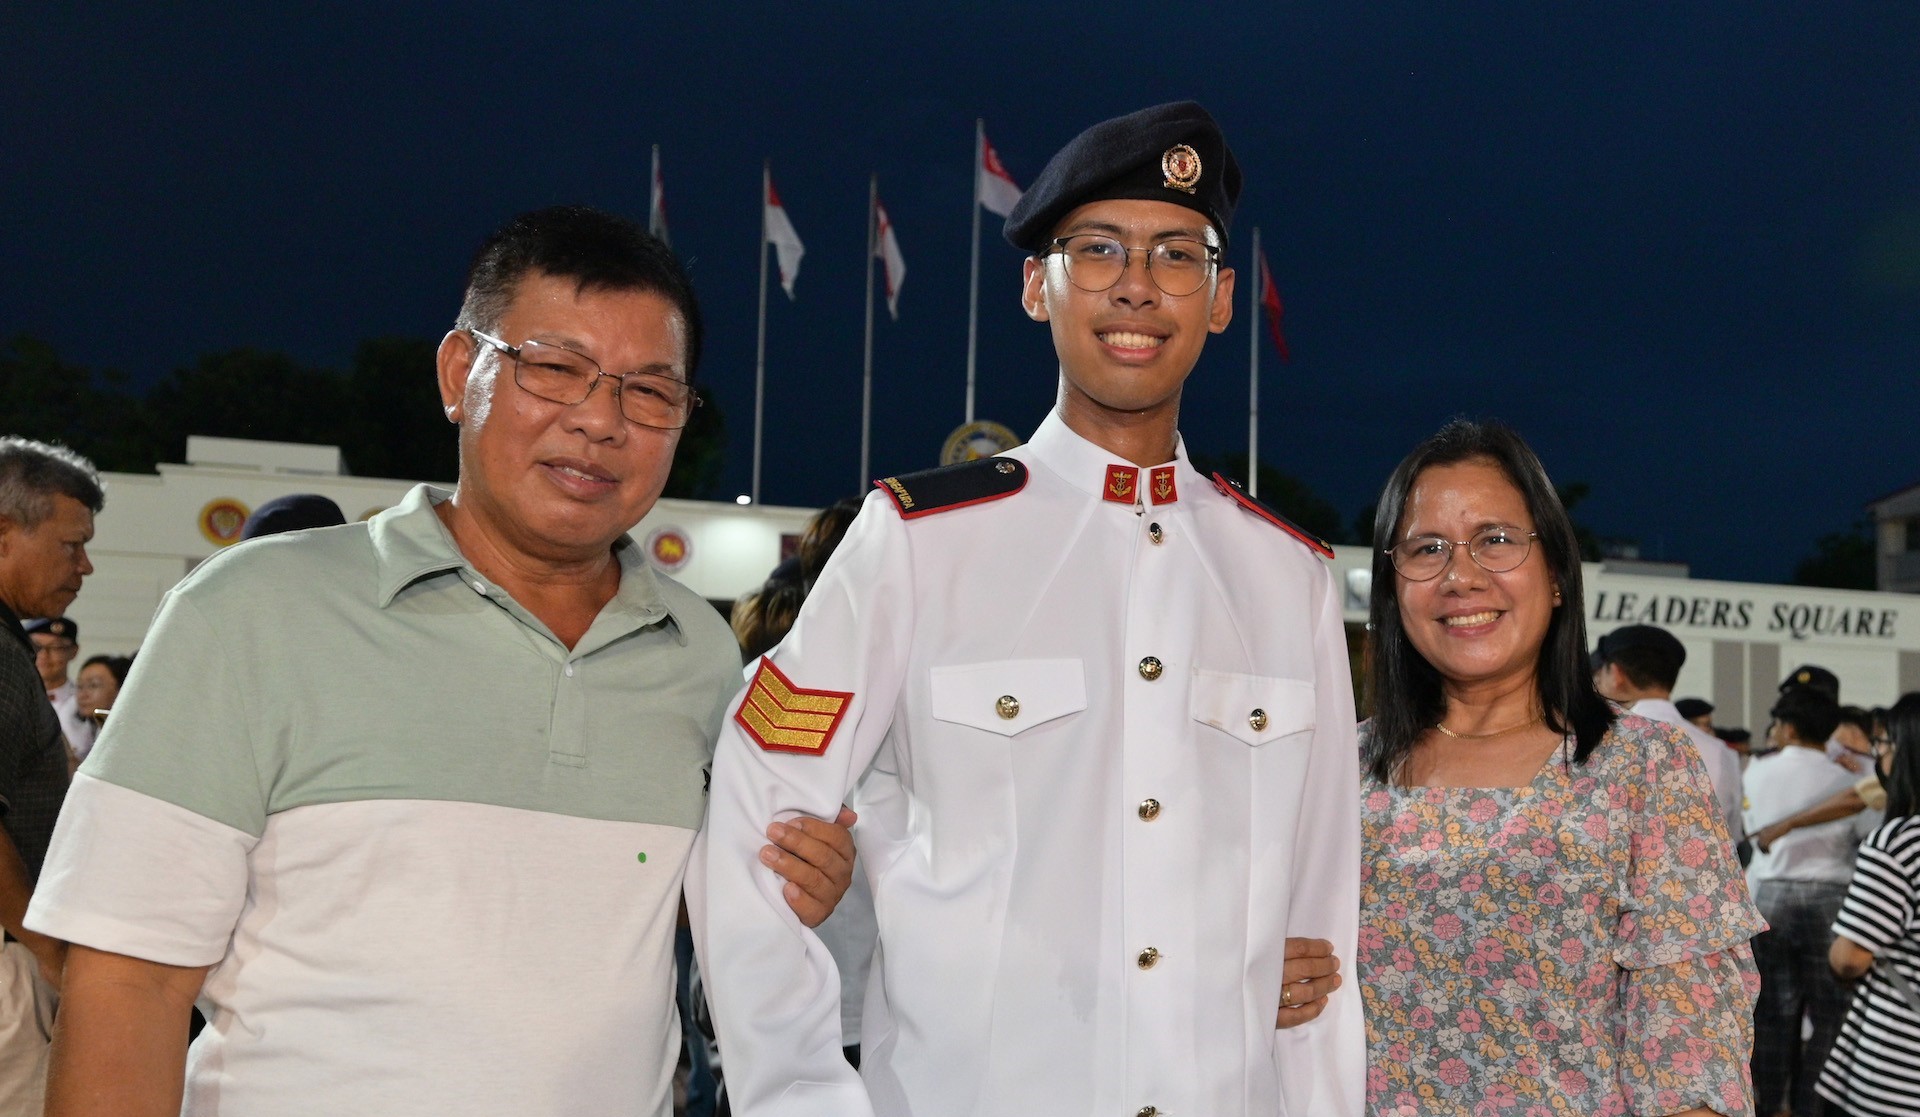 First in family to enlist, learning to lead